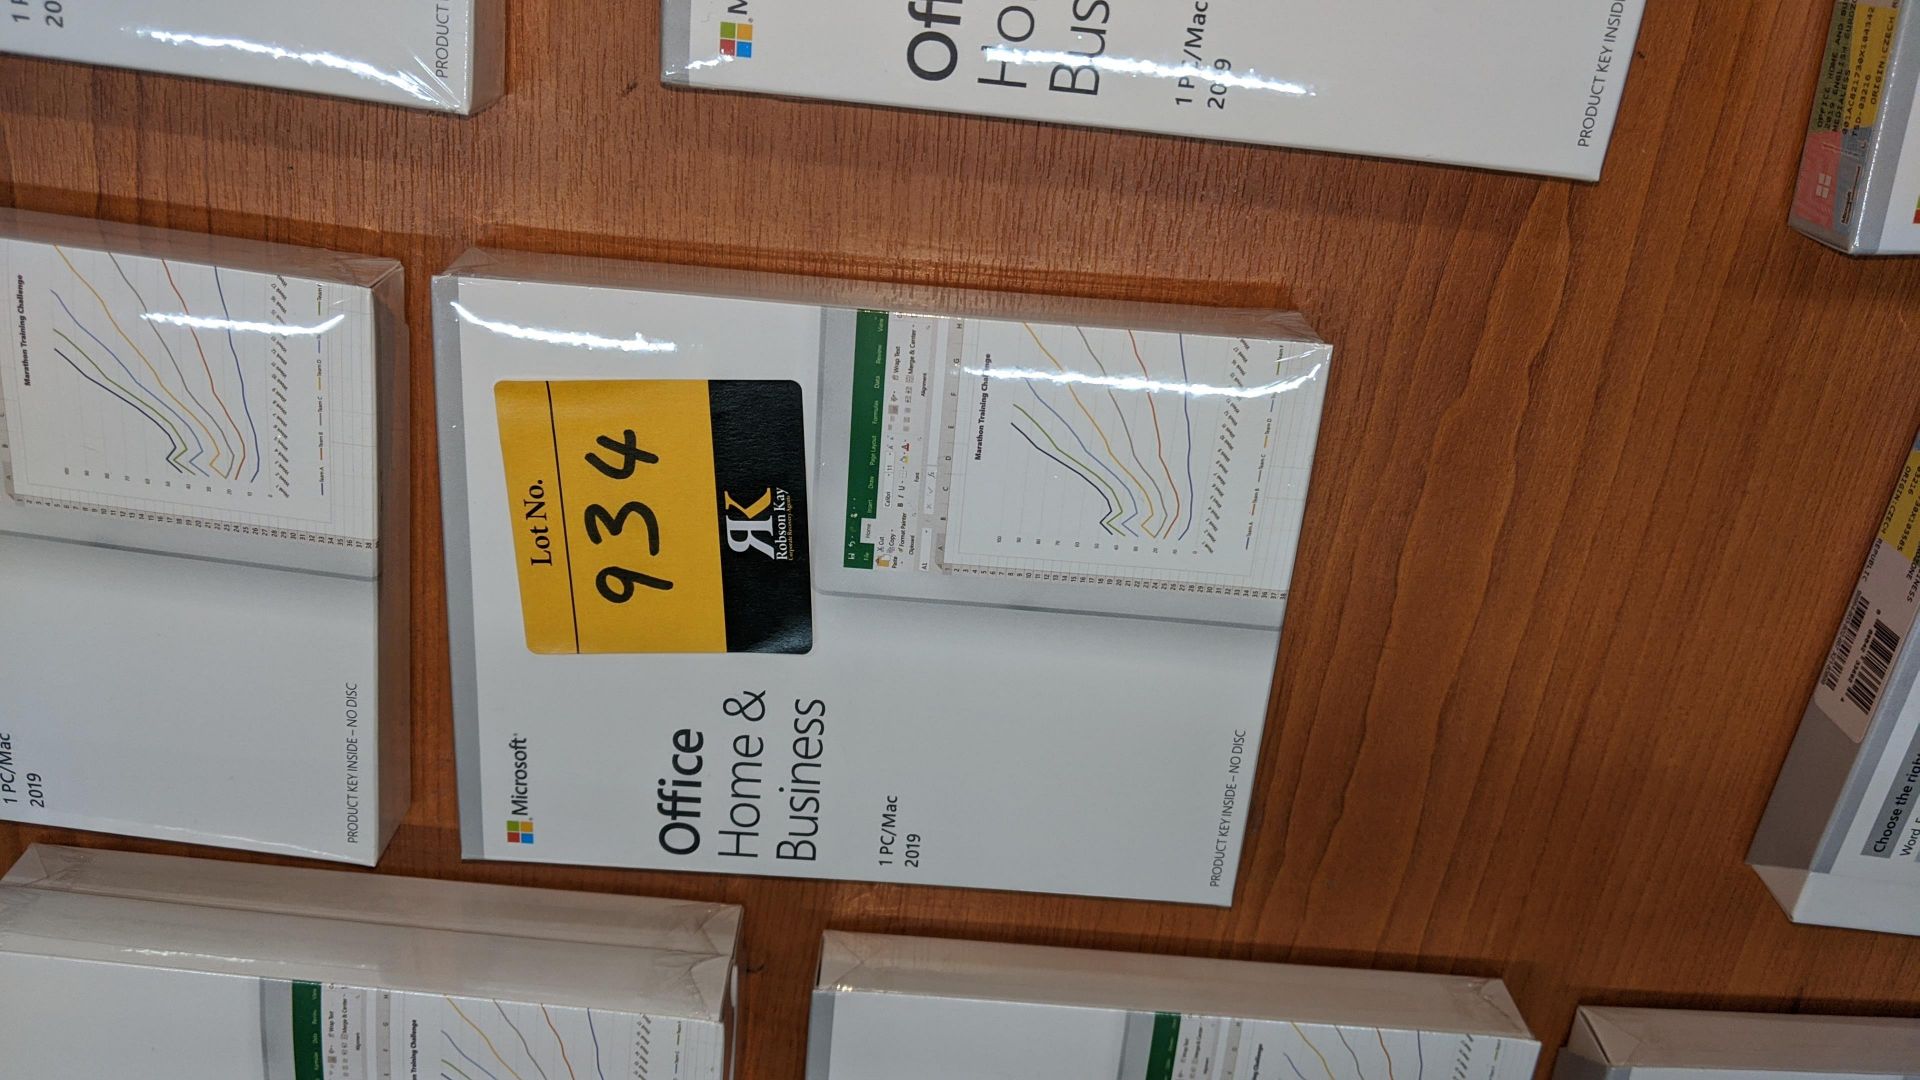 Microsoft Office Home & Business 2019 for PC/MAC. This lot comprises a sealed box with licence - Image 2 of 3